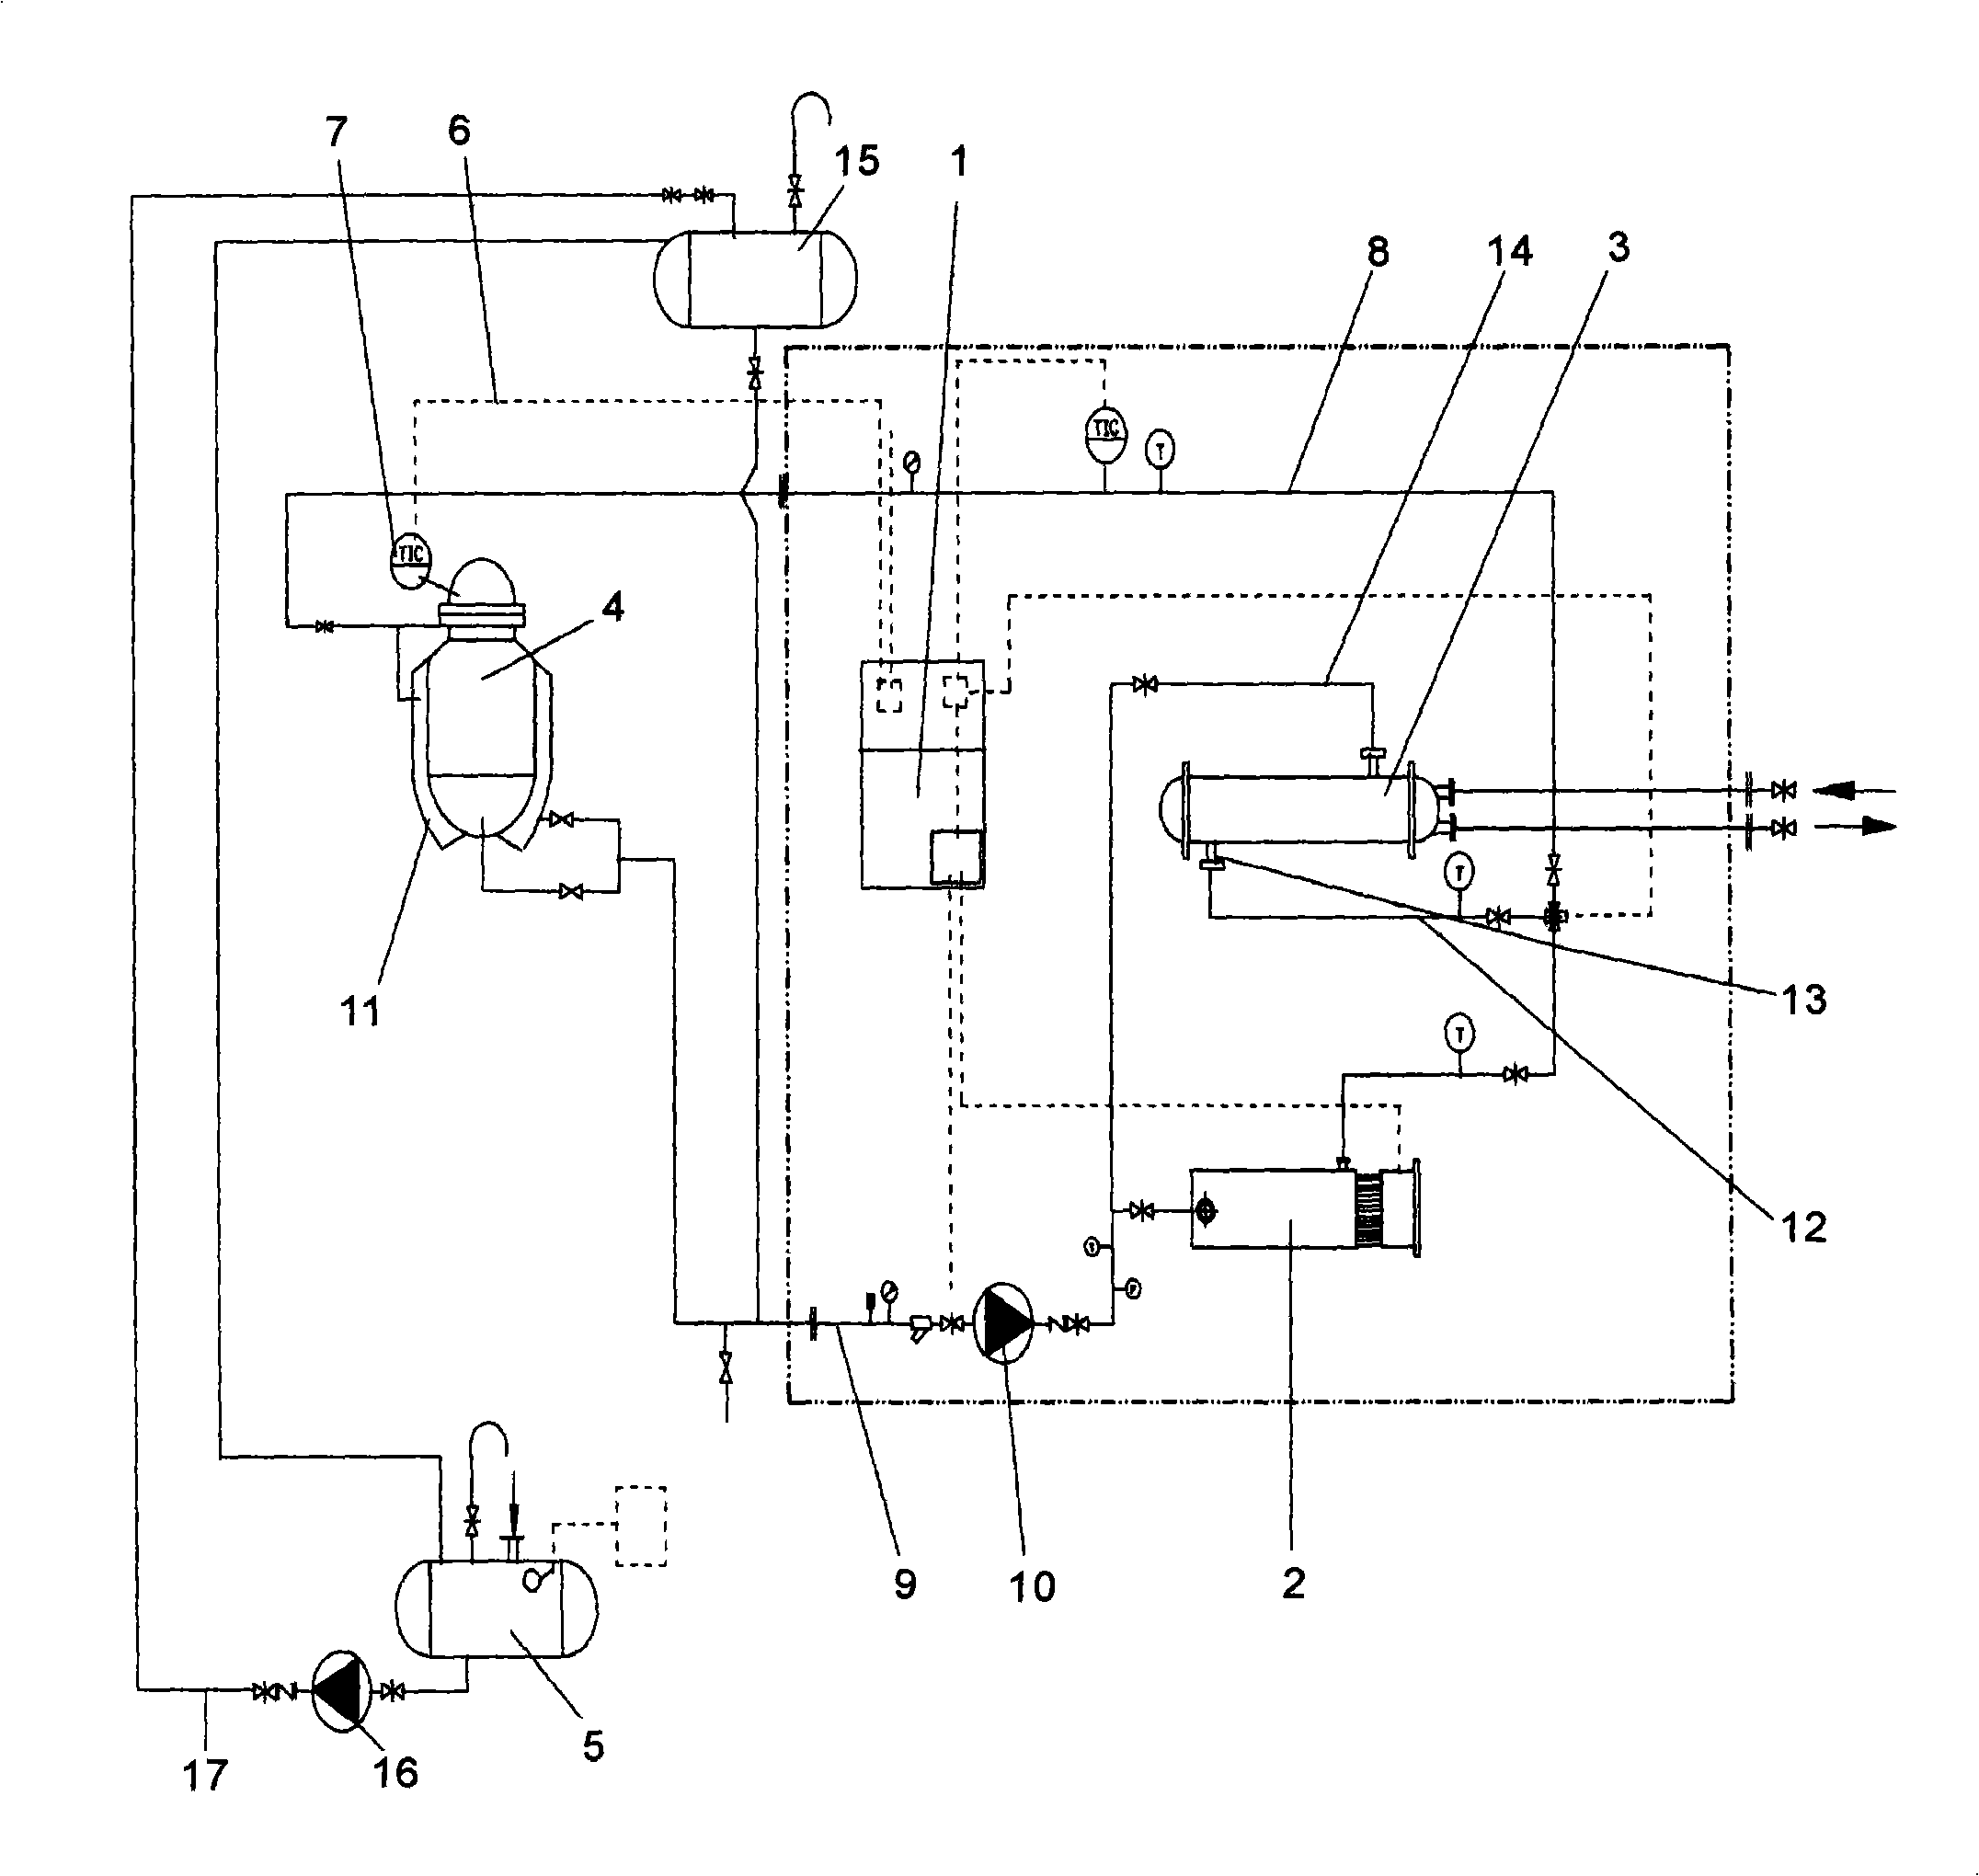 Temperature device for controlling heating or cooling of reaction kettle